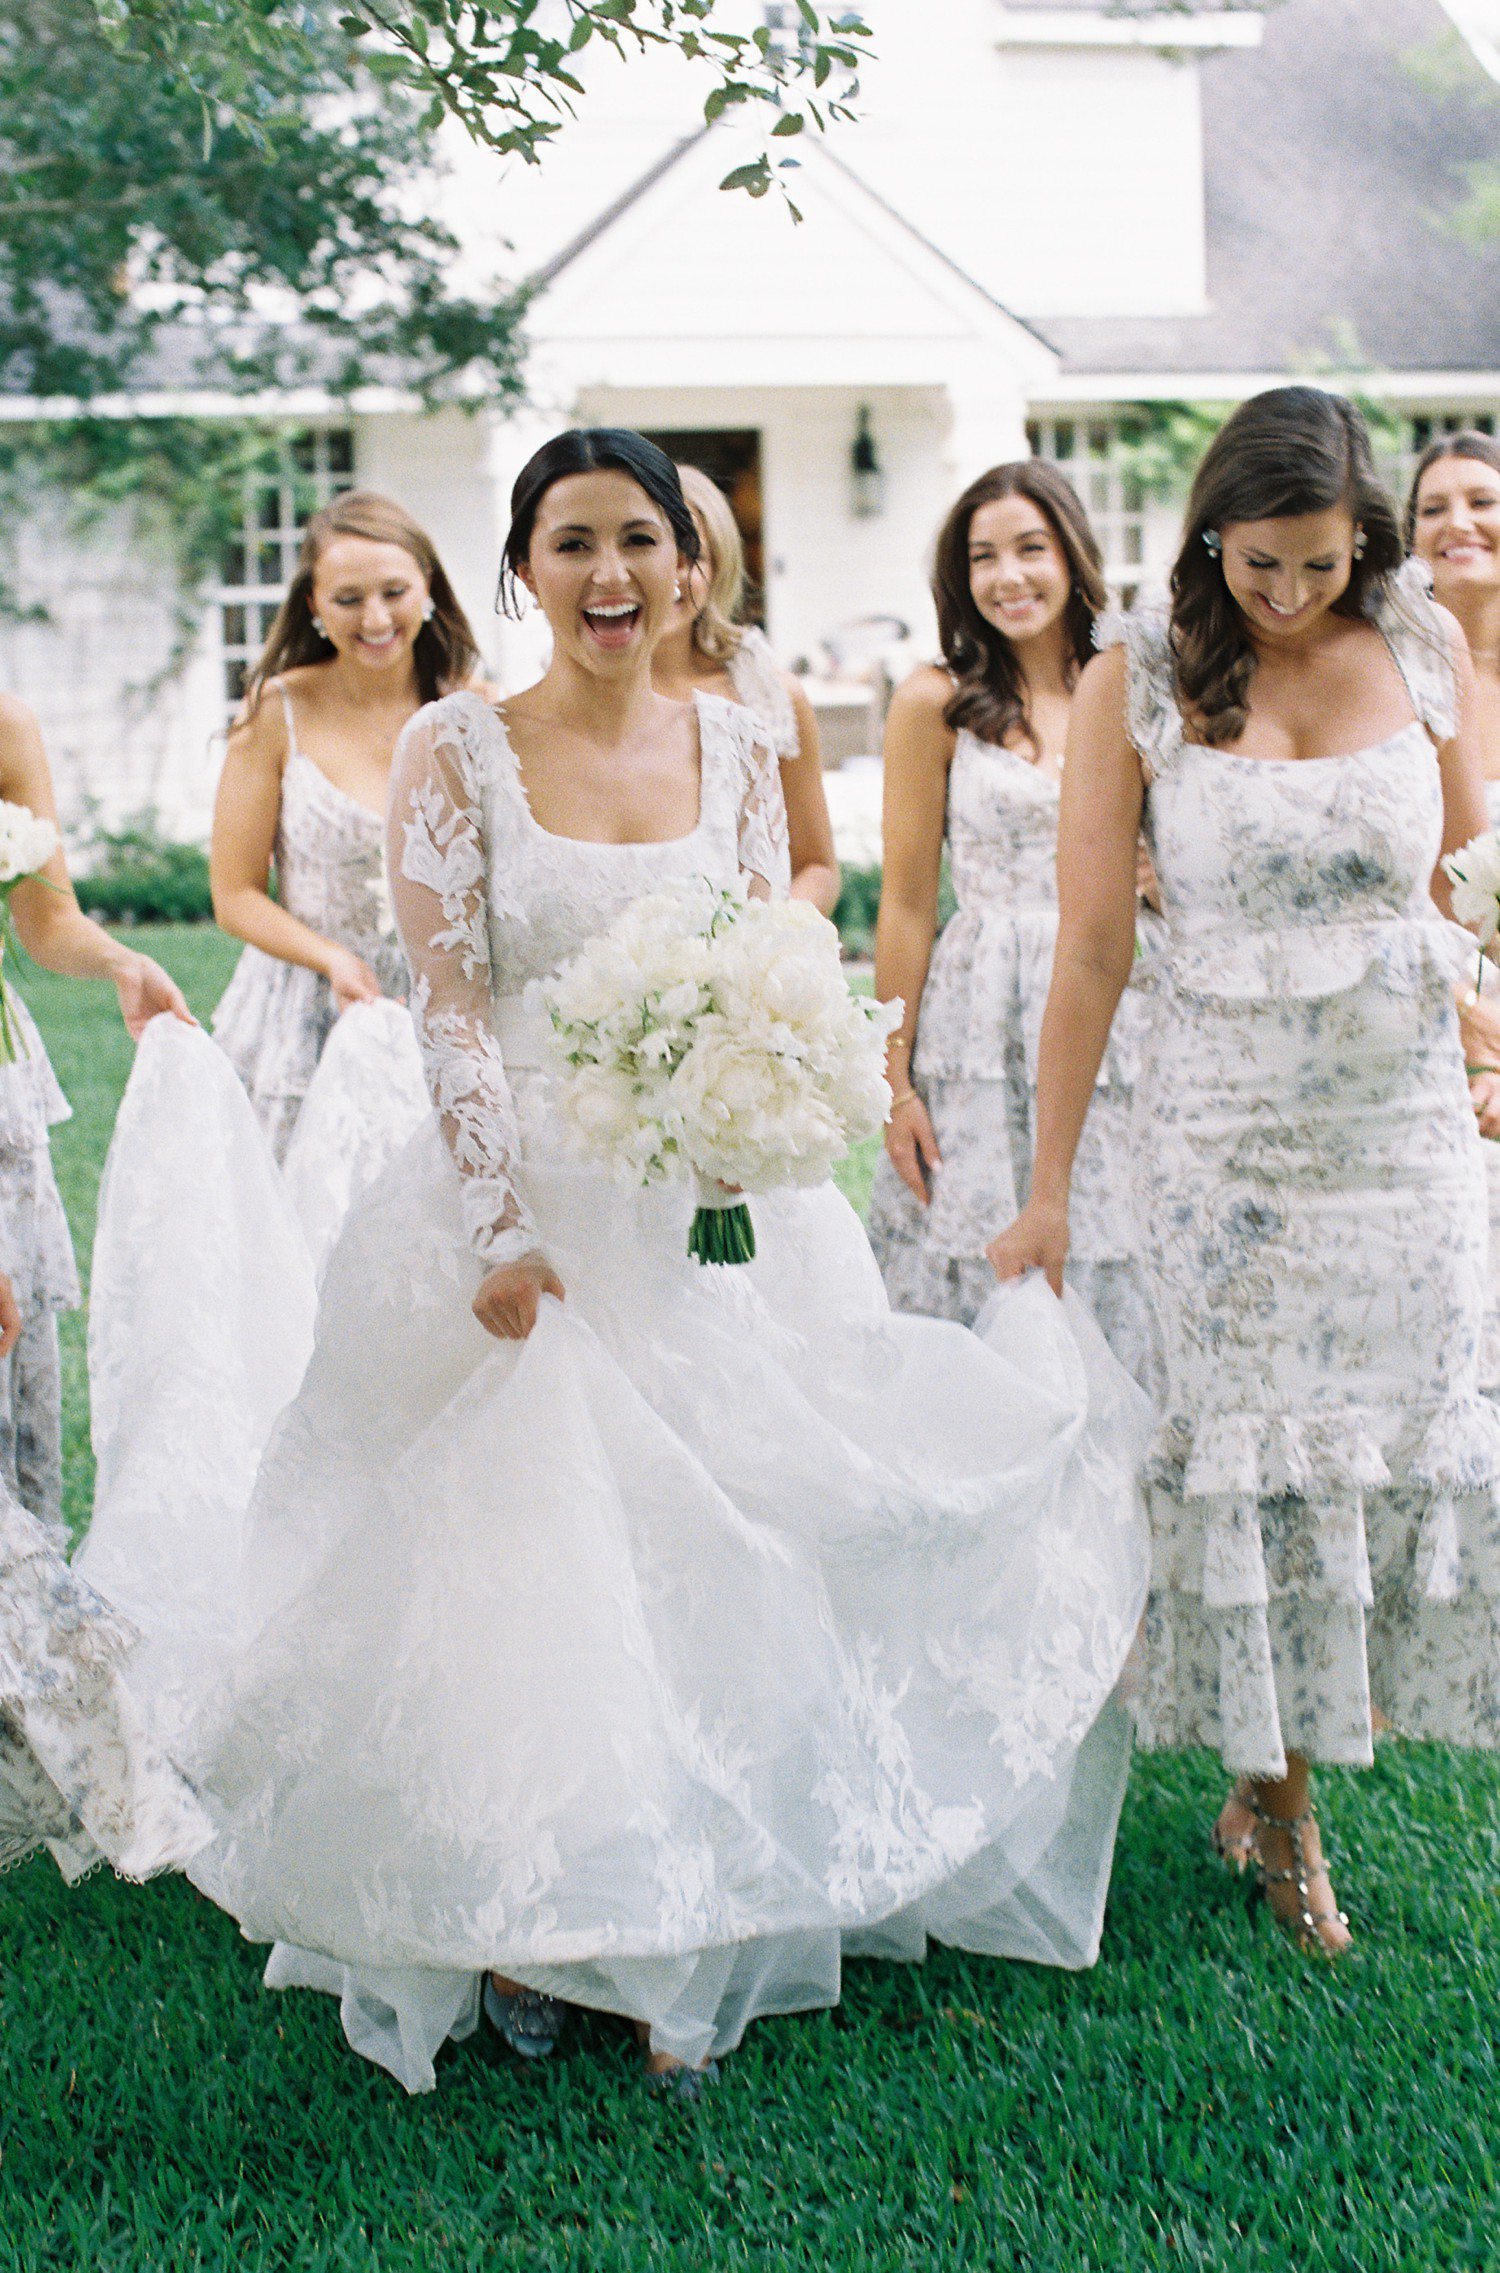 Bride walking with bridesmaids holding white bouquet.